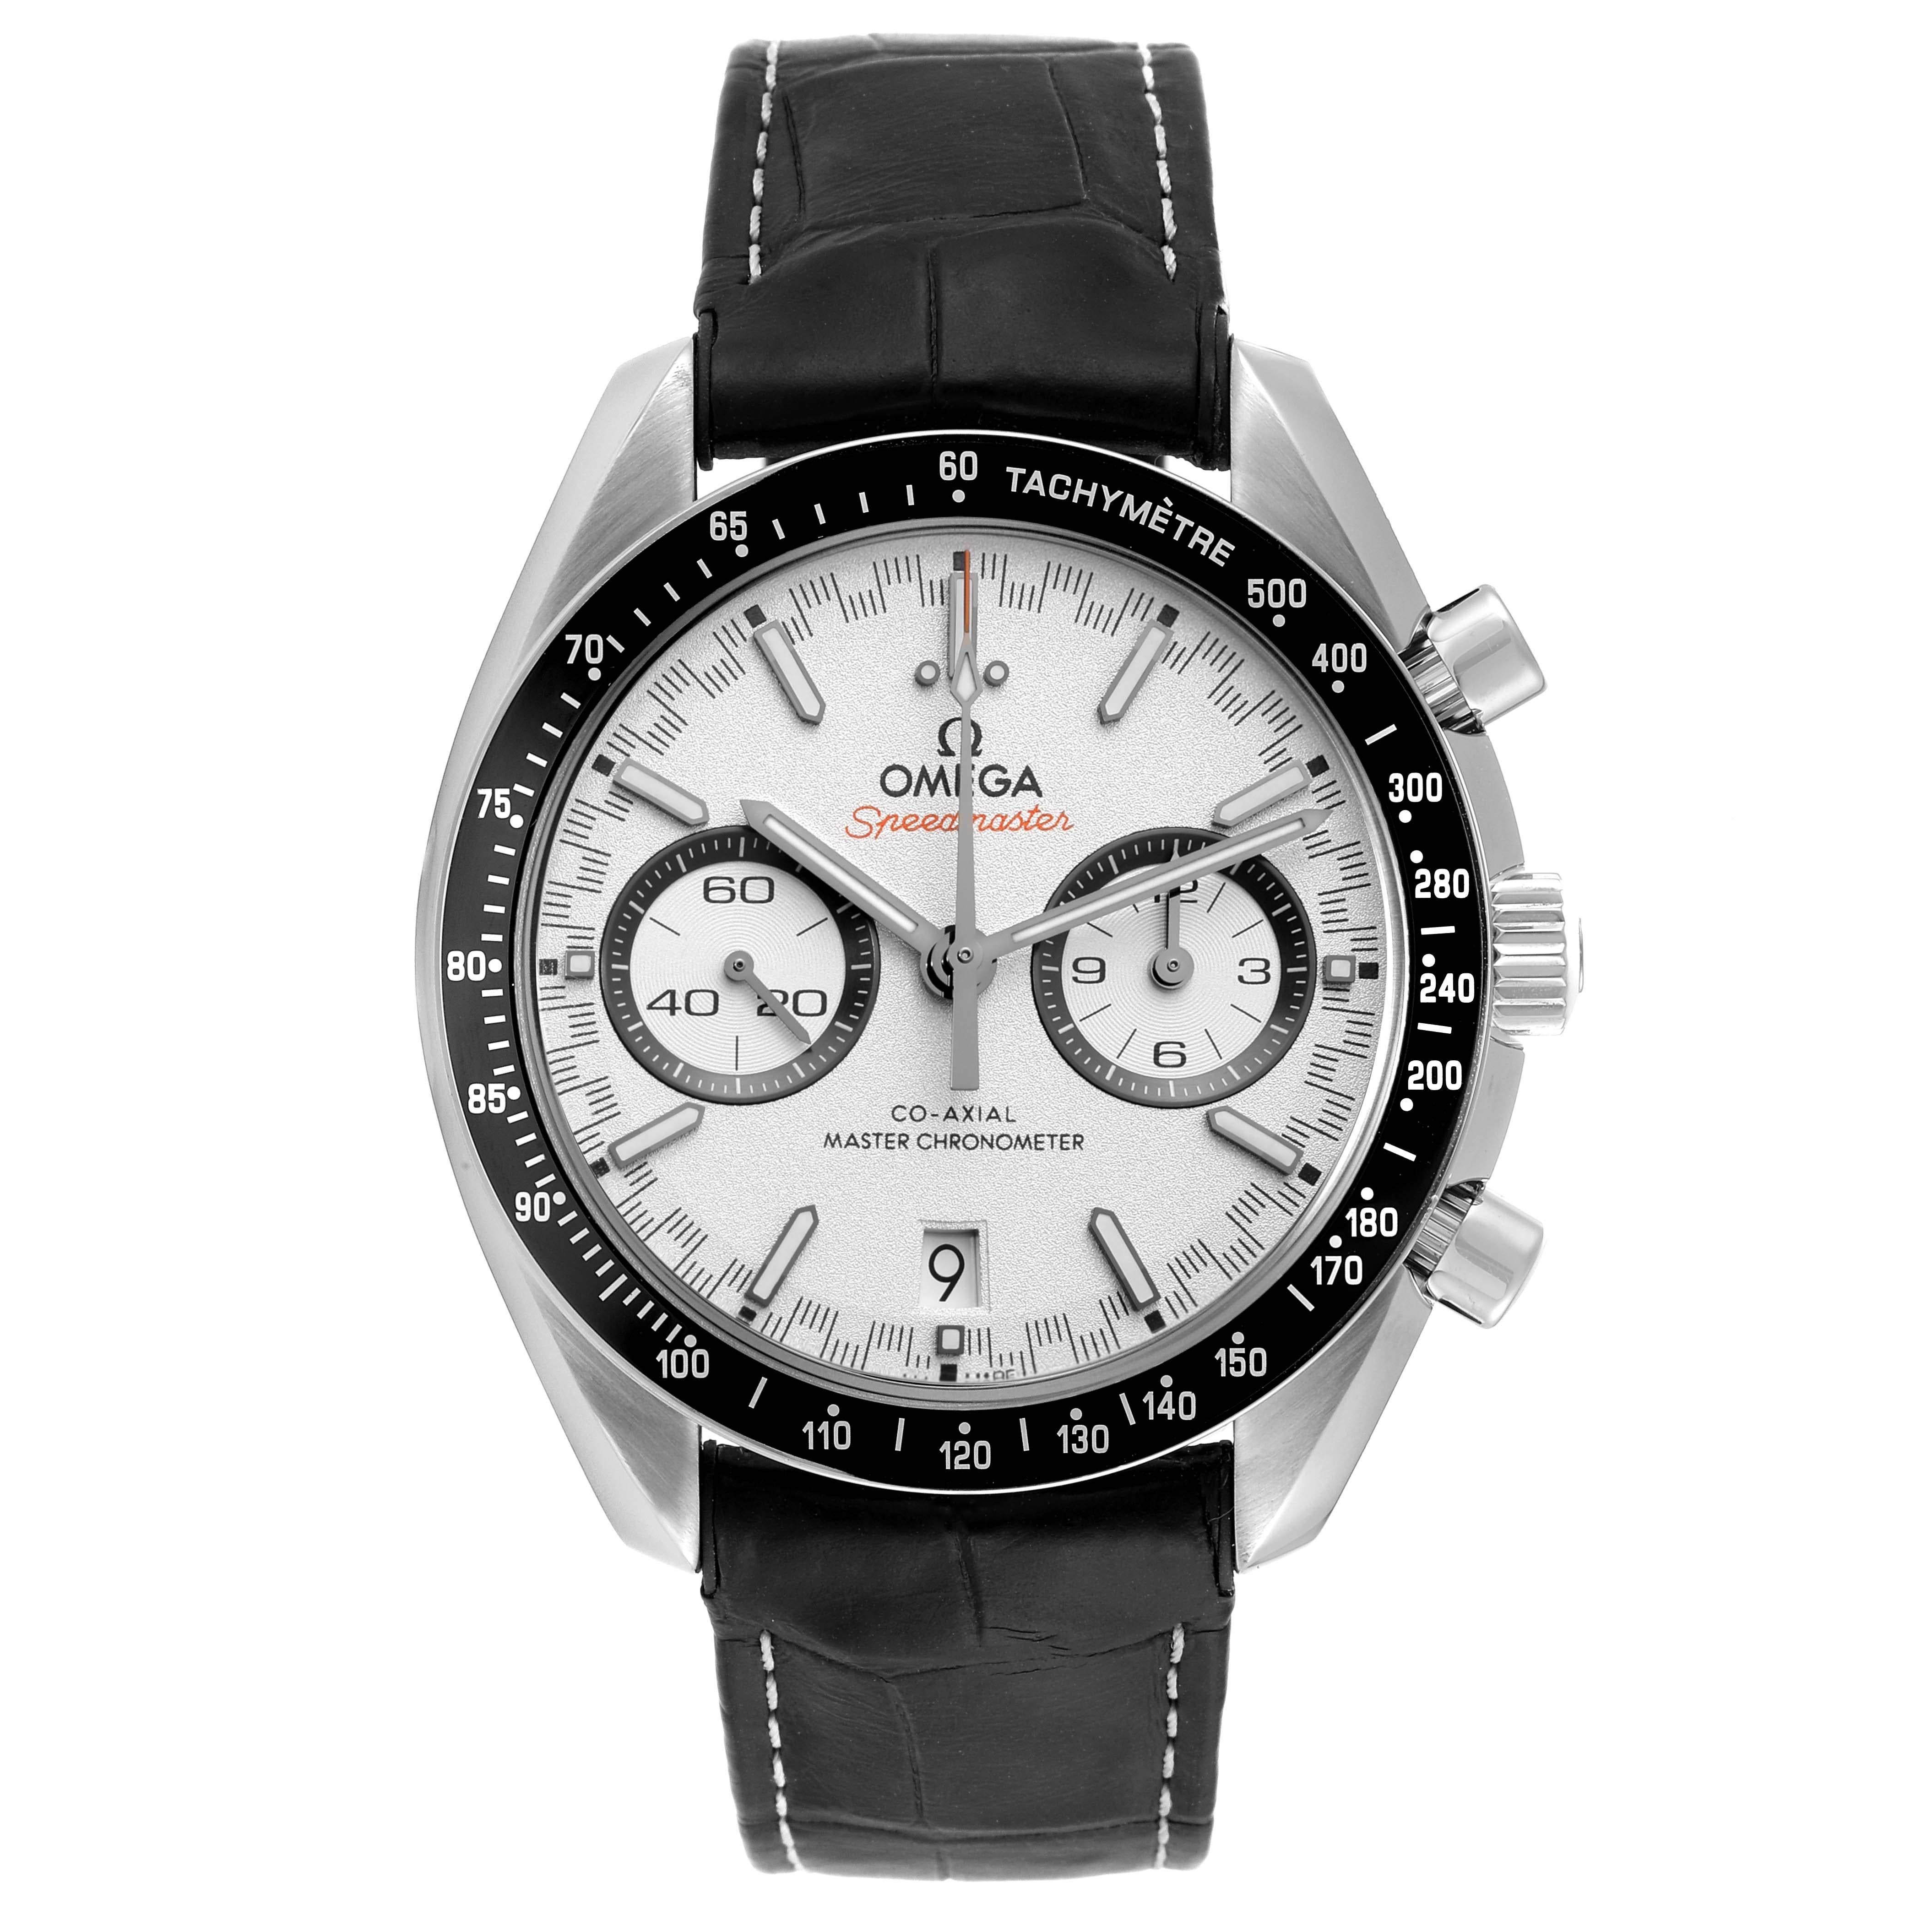 Omega Speedmaster Racing Anti-Magnetic Mens Watch 329.33.44.51.04.001 Box Card. Automatic self-winding chronograph movement with column wheel and Co-Axial escapement. Certified Master chronometer, resistant to magnetic fieldsreaching 15,000 gauss.